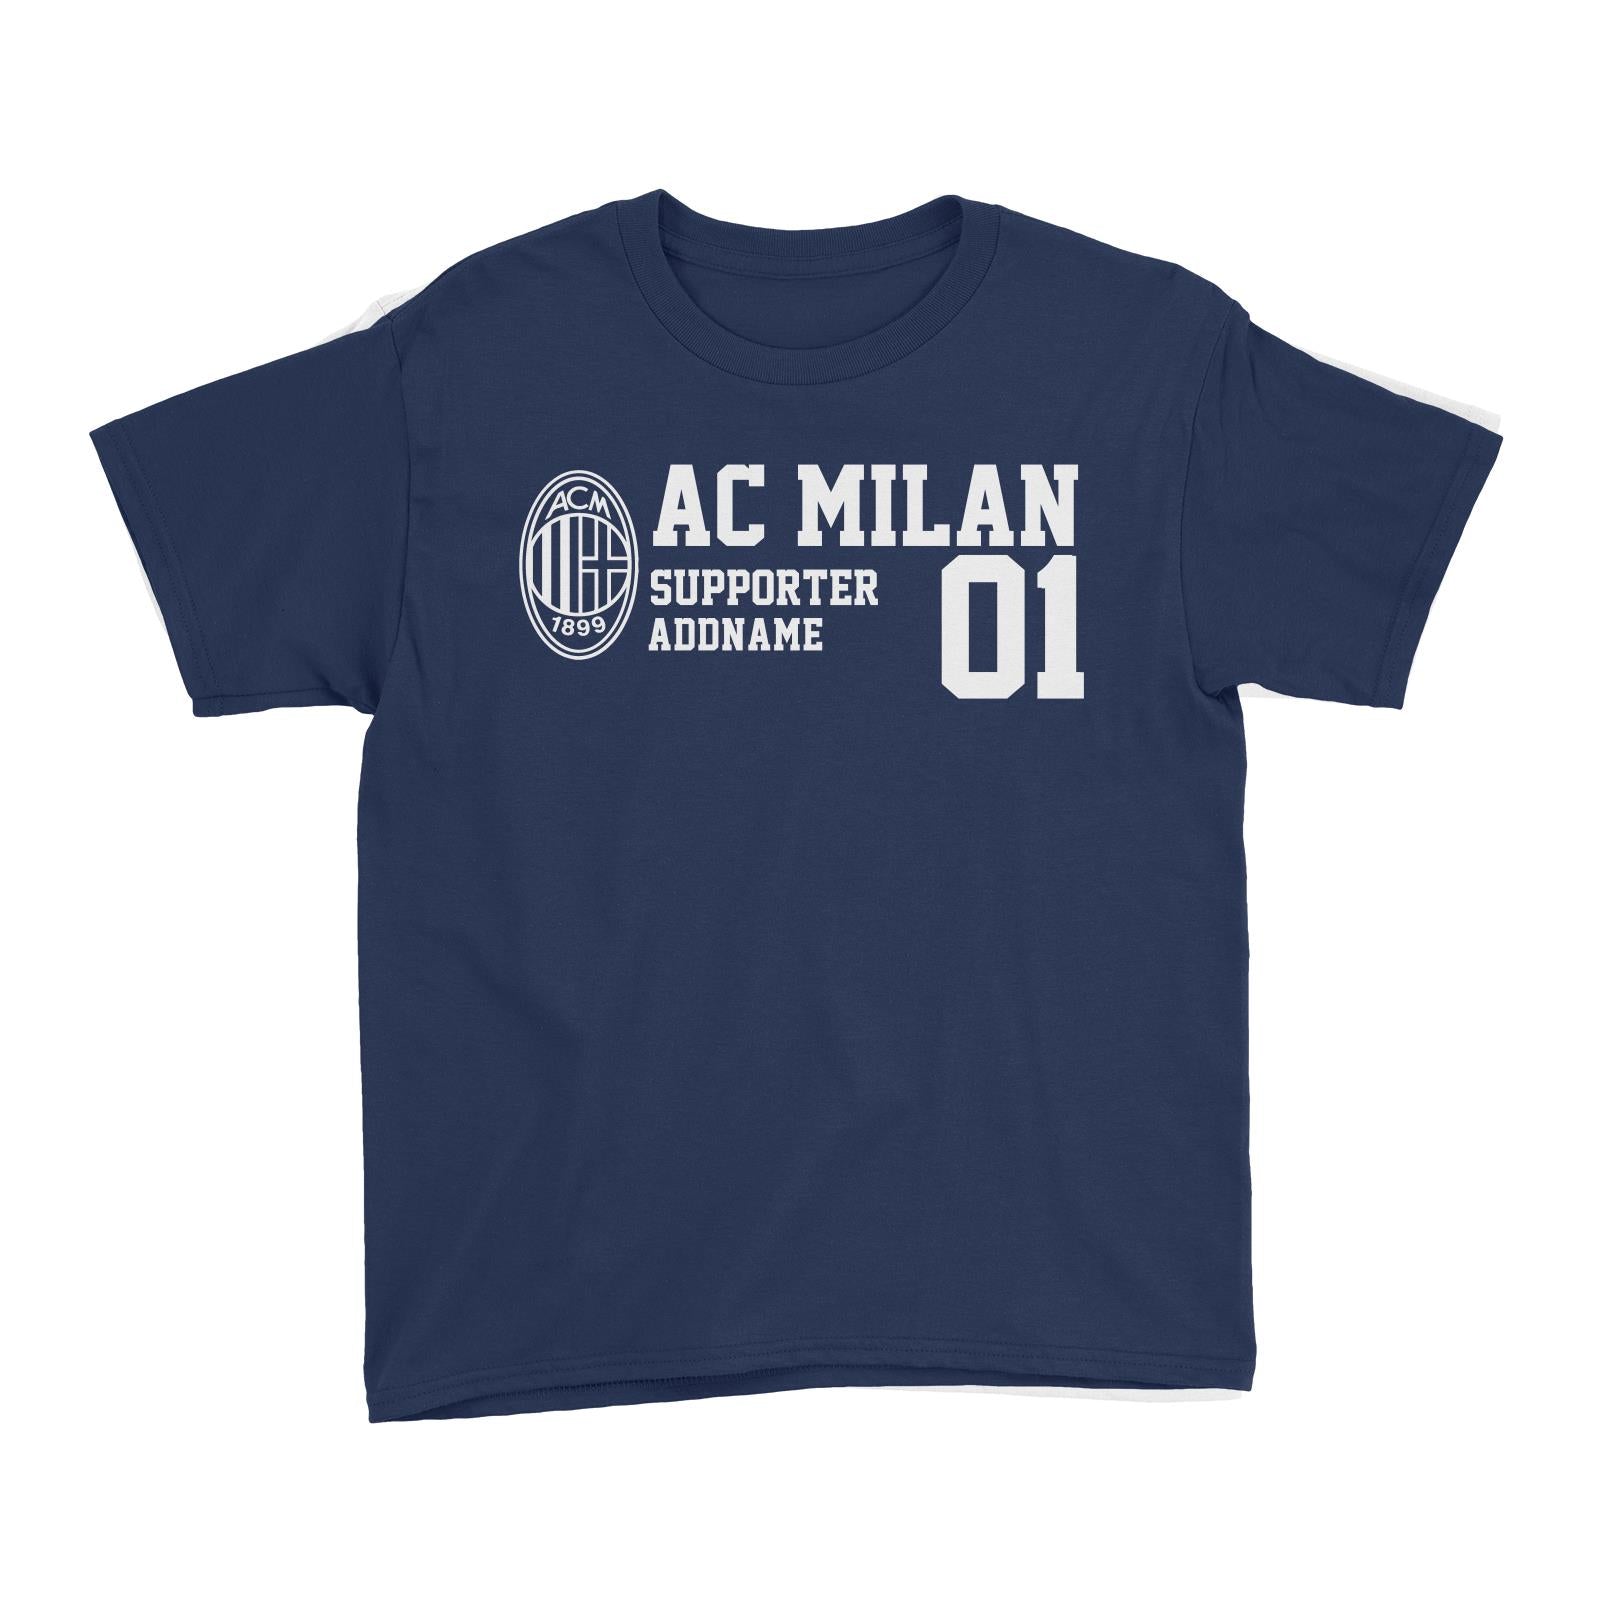 AC Milan Football Supporter Addname Kid's T-Shirt